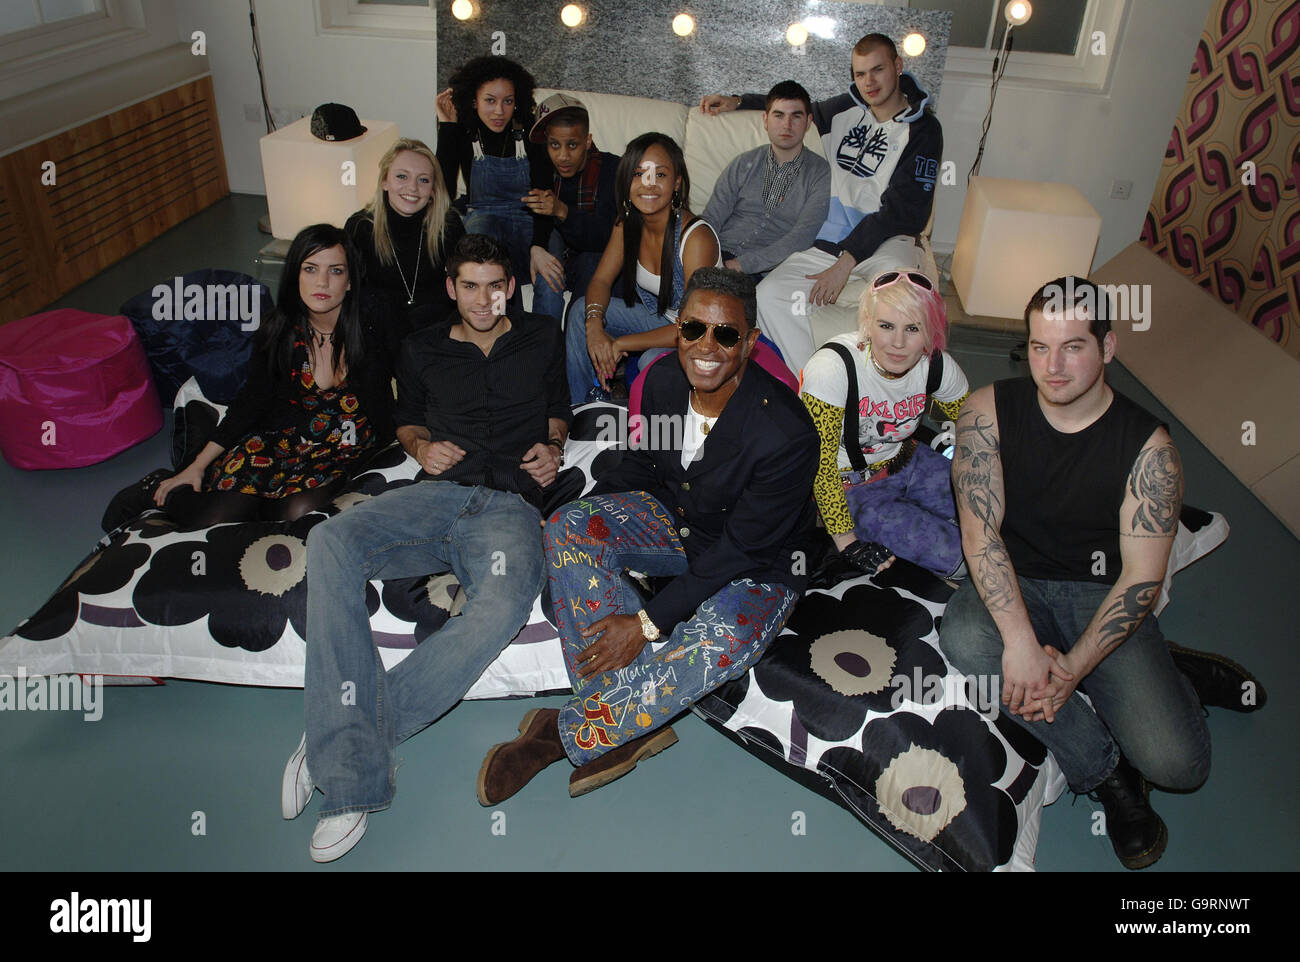 American musician Jermaine Jackson (front centre) with performers from T4 reality show Musicool which aims to find the most talented young musicians around and make them better; (from left to right, back row to front) Abi Ryan, Cleo Humphrey, Michael Whittaker, Annikka Gabbitas, Darren Smith, Chris Royle, (front row) Fe Salmon, Nick Barrett, Esther Barton and Will Atkinson, at recording studios in Kentish Town, north London. Stock Photo